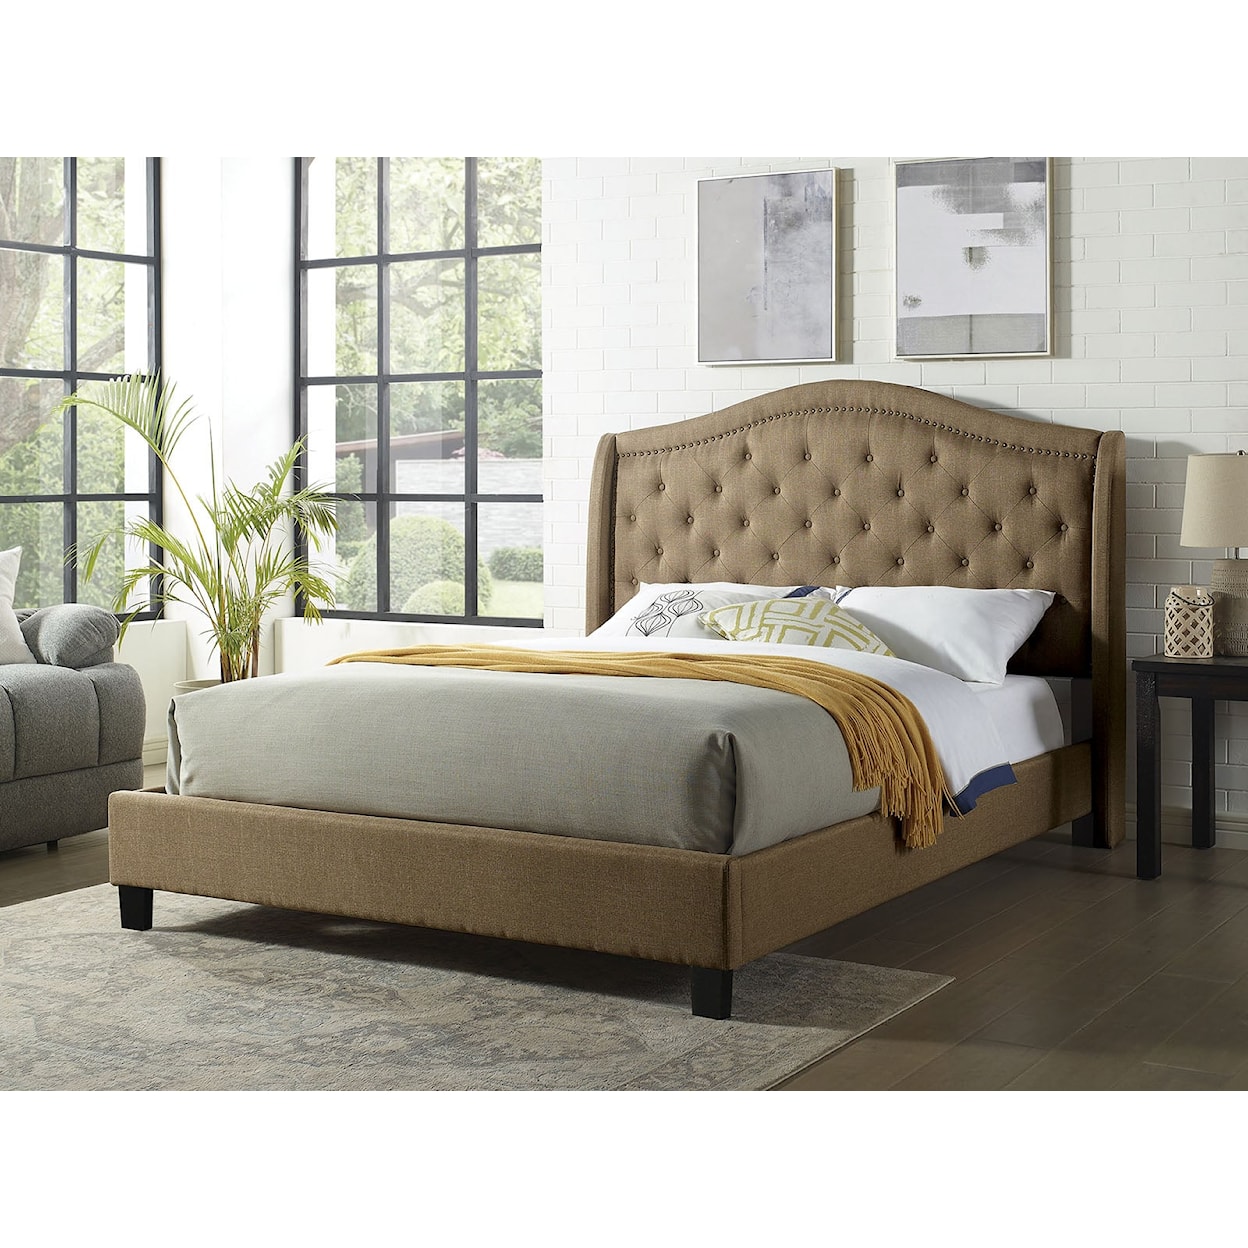 Furniture of America Carly Queen Bed, Brown